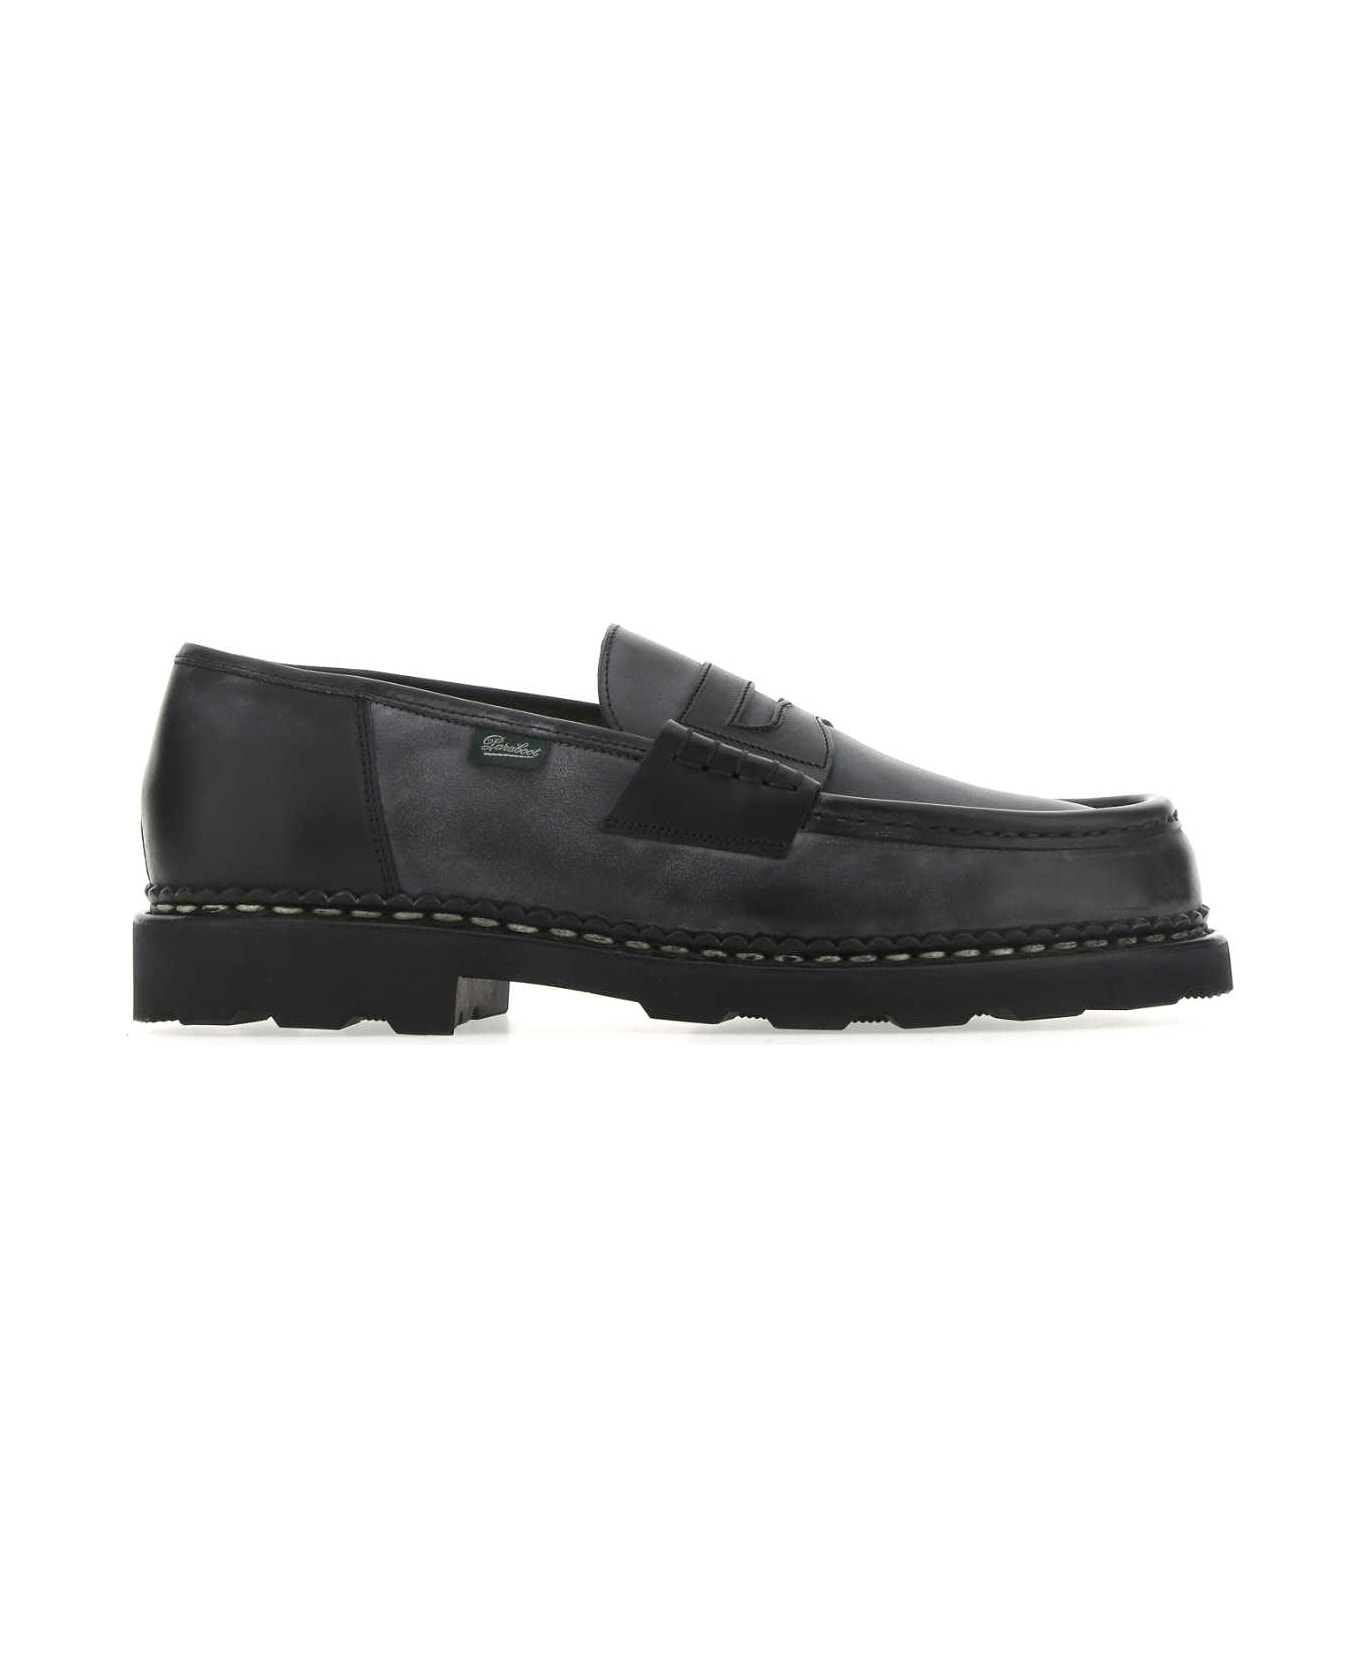 Paraboot Black Leather Loafers - NOIR